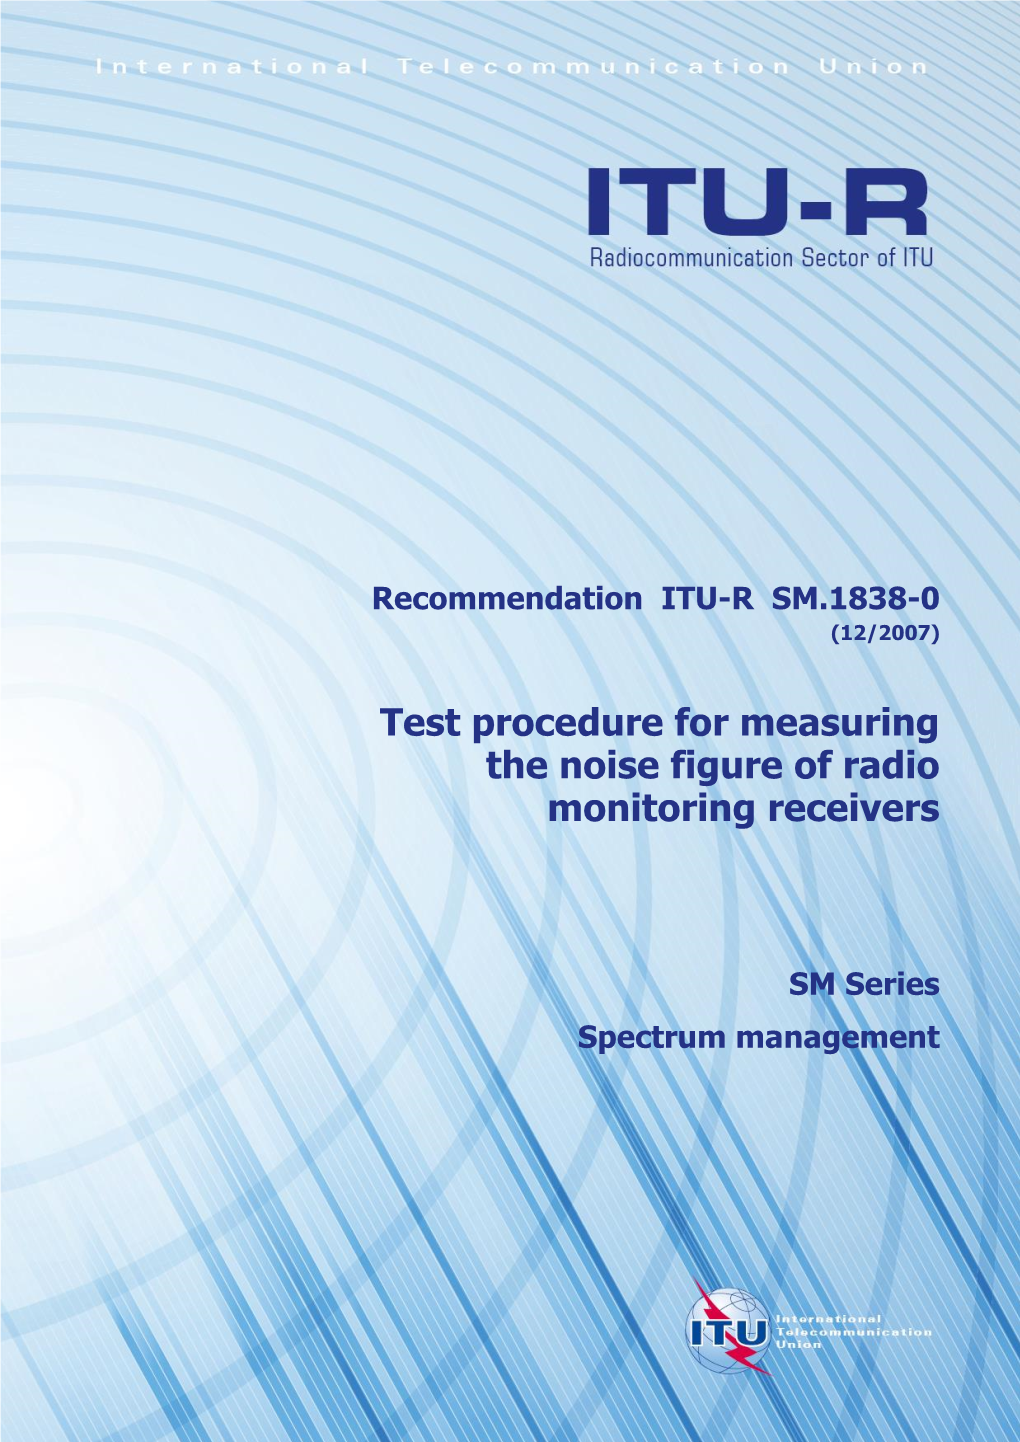 Test Procedure for Measuring the Noise Figure of Radio Monitoring Receivers